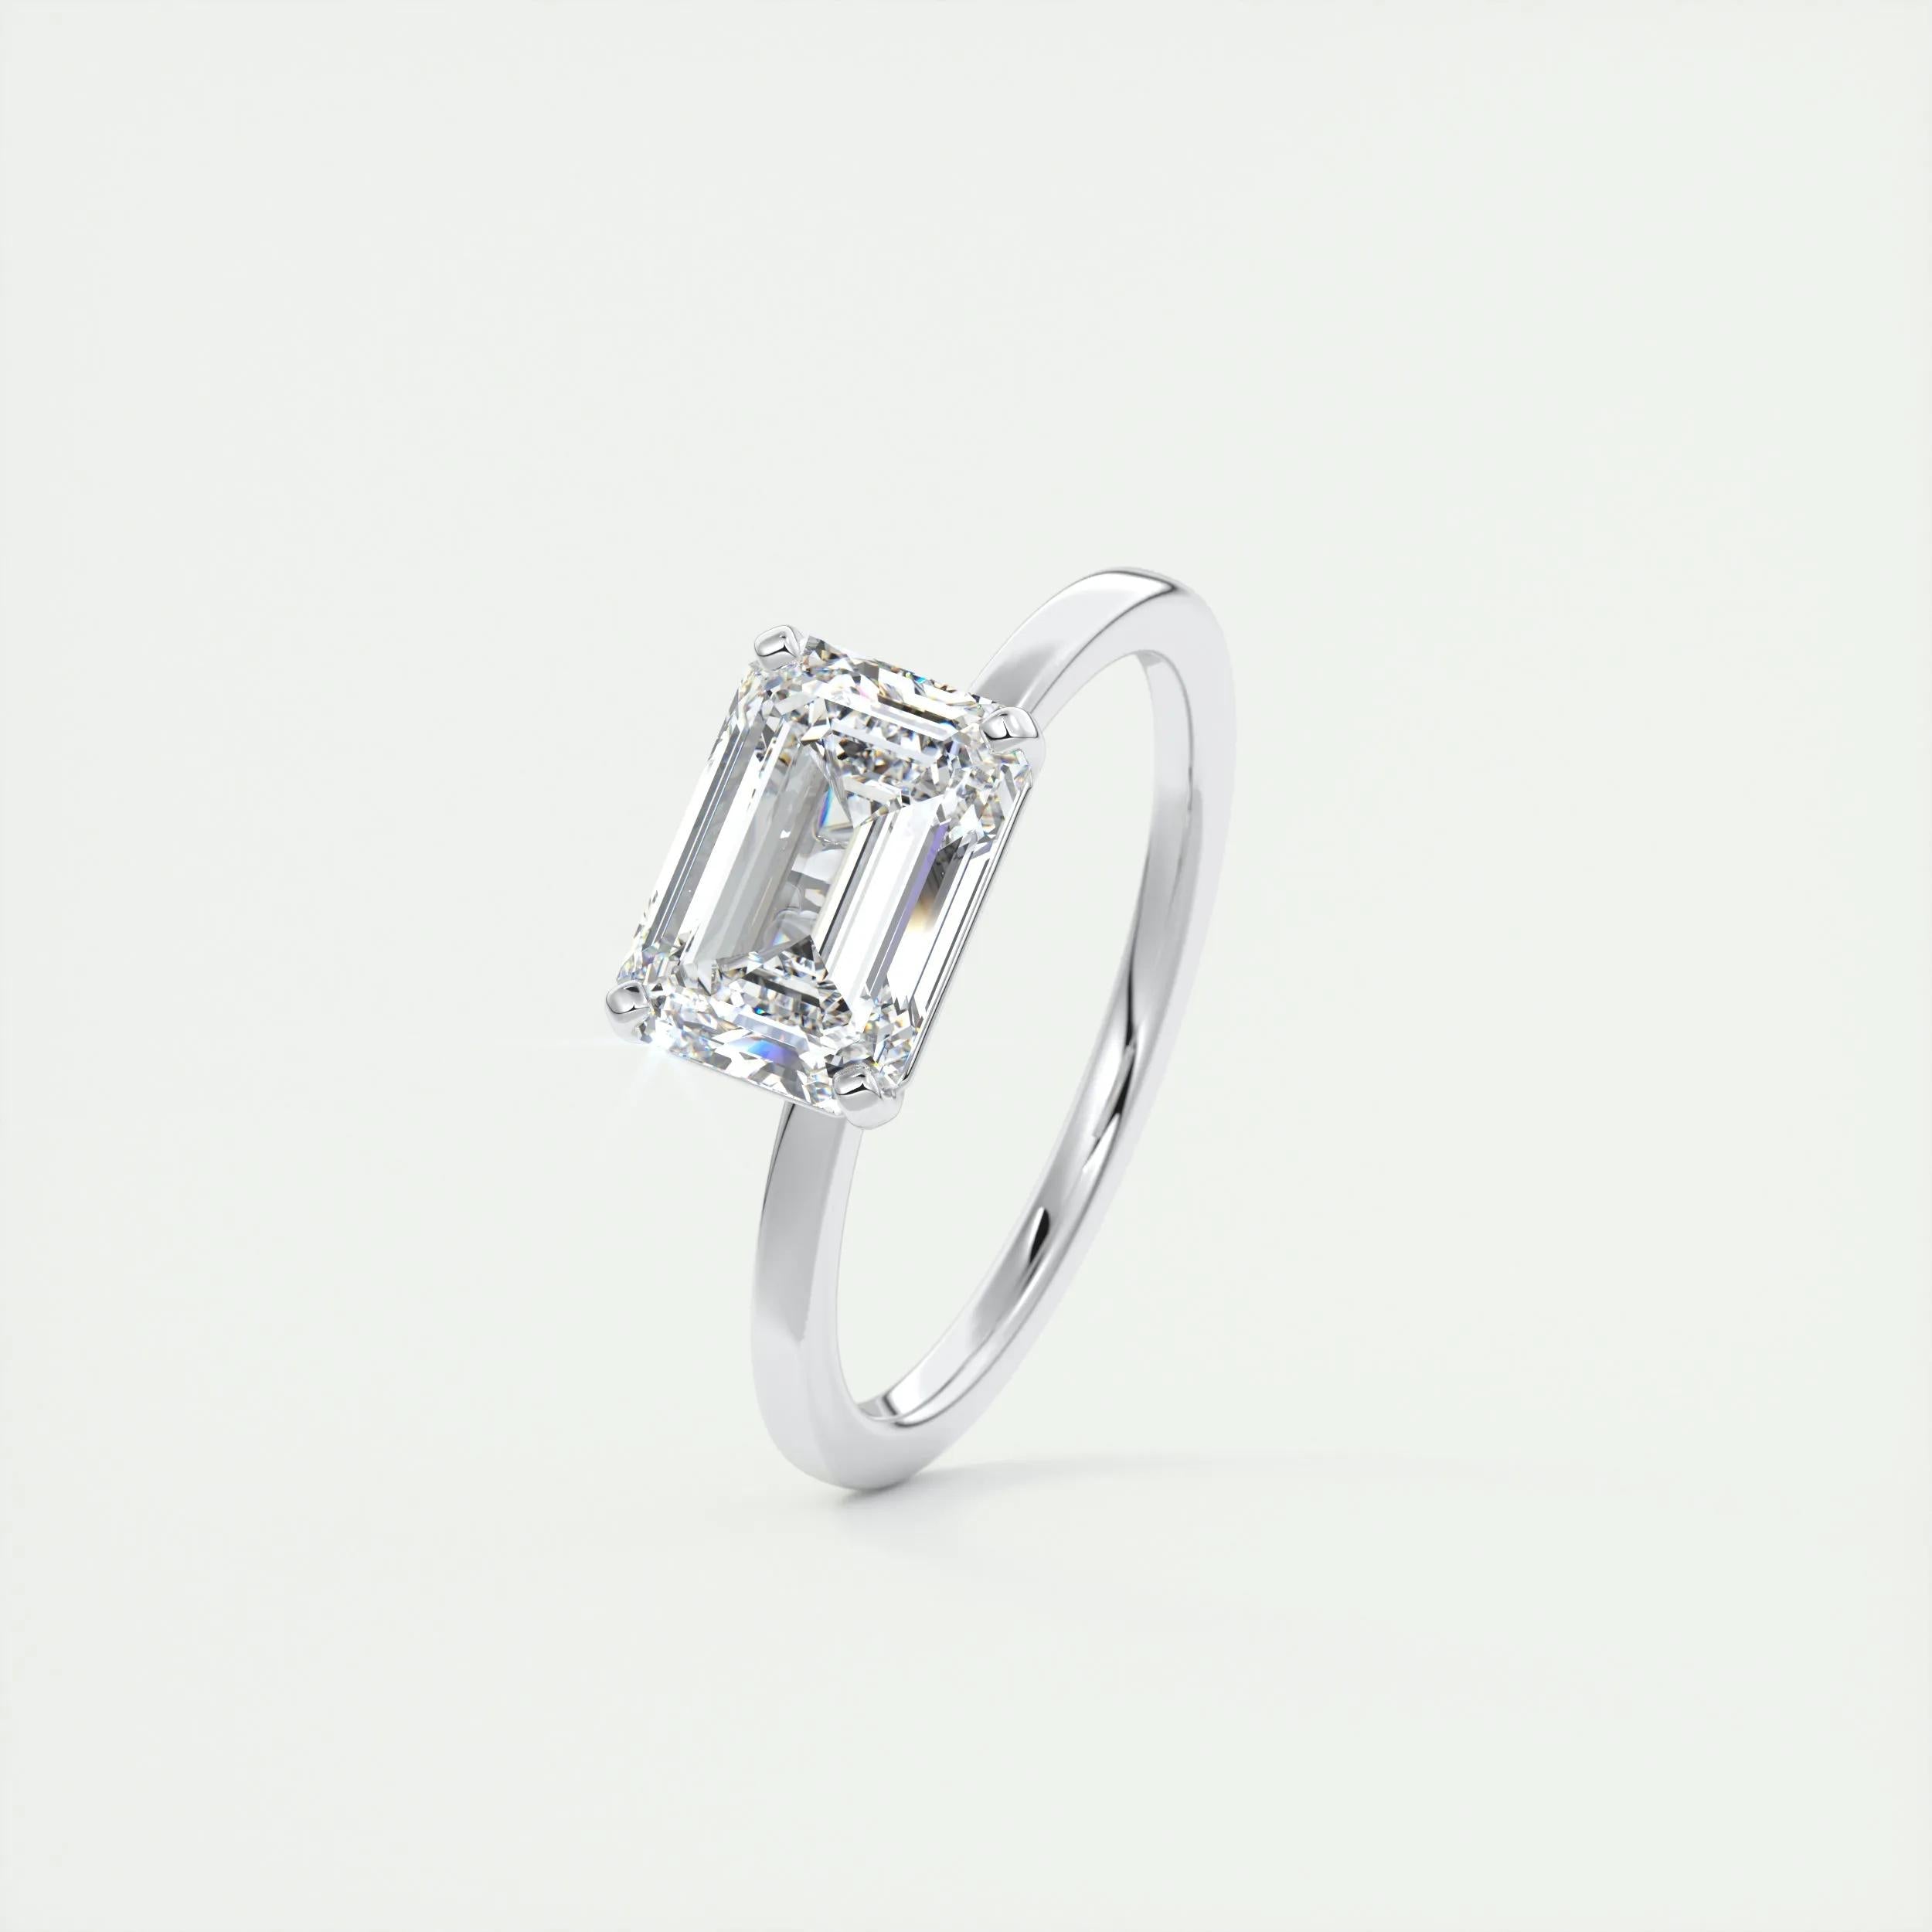 1.91 CT Emerald Cut Solitaire Moissanite Engagement Ring 5